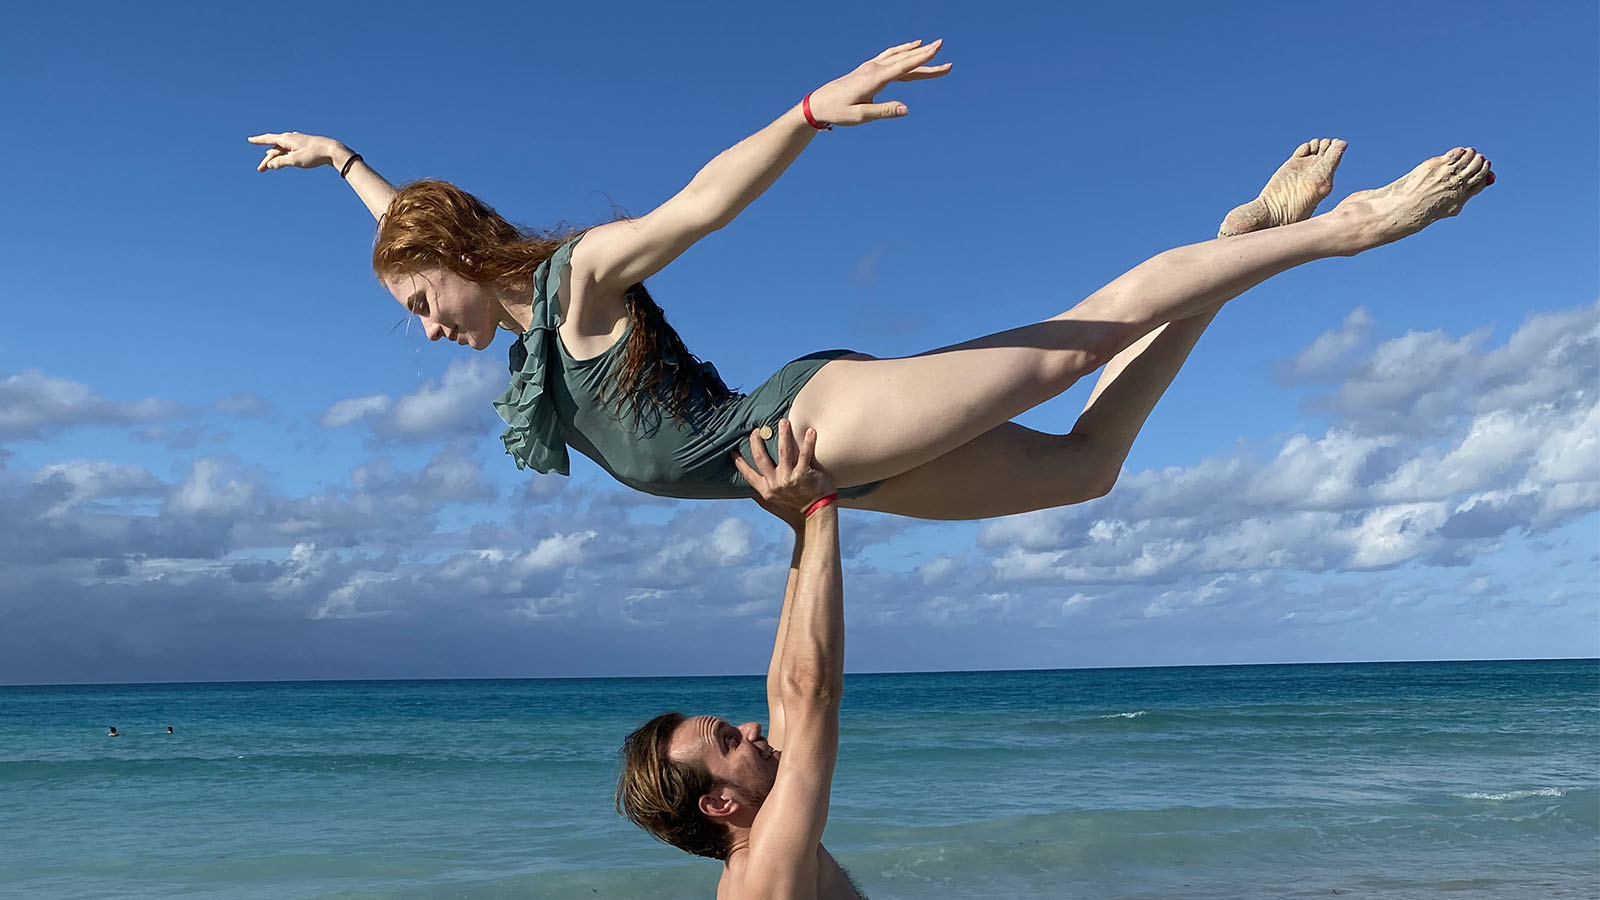 A man lifts a woman above him in a dancers pose with crystal blue waters behind them